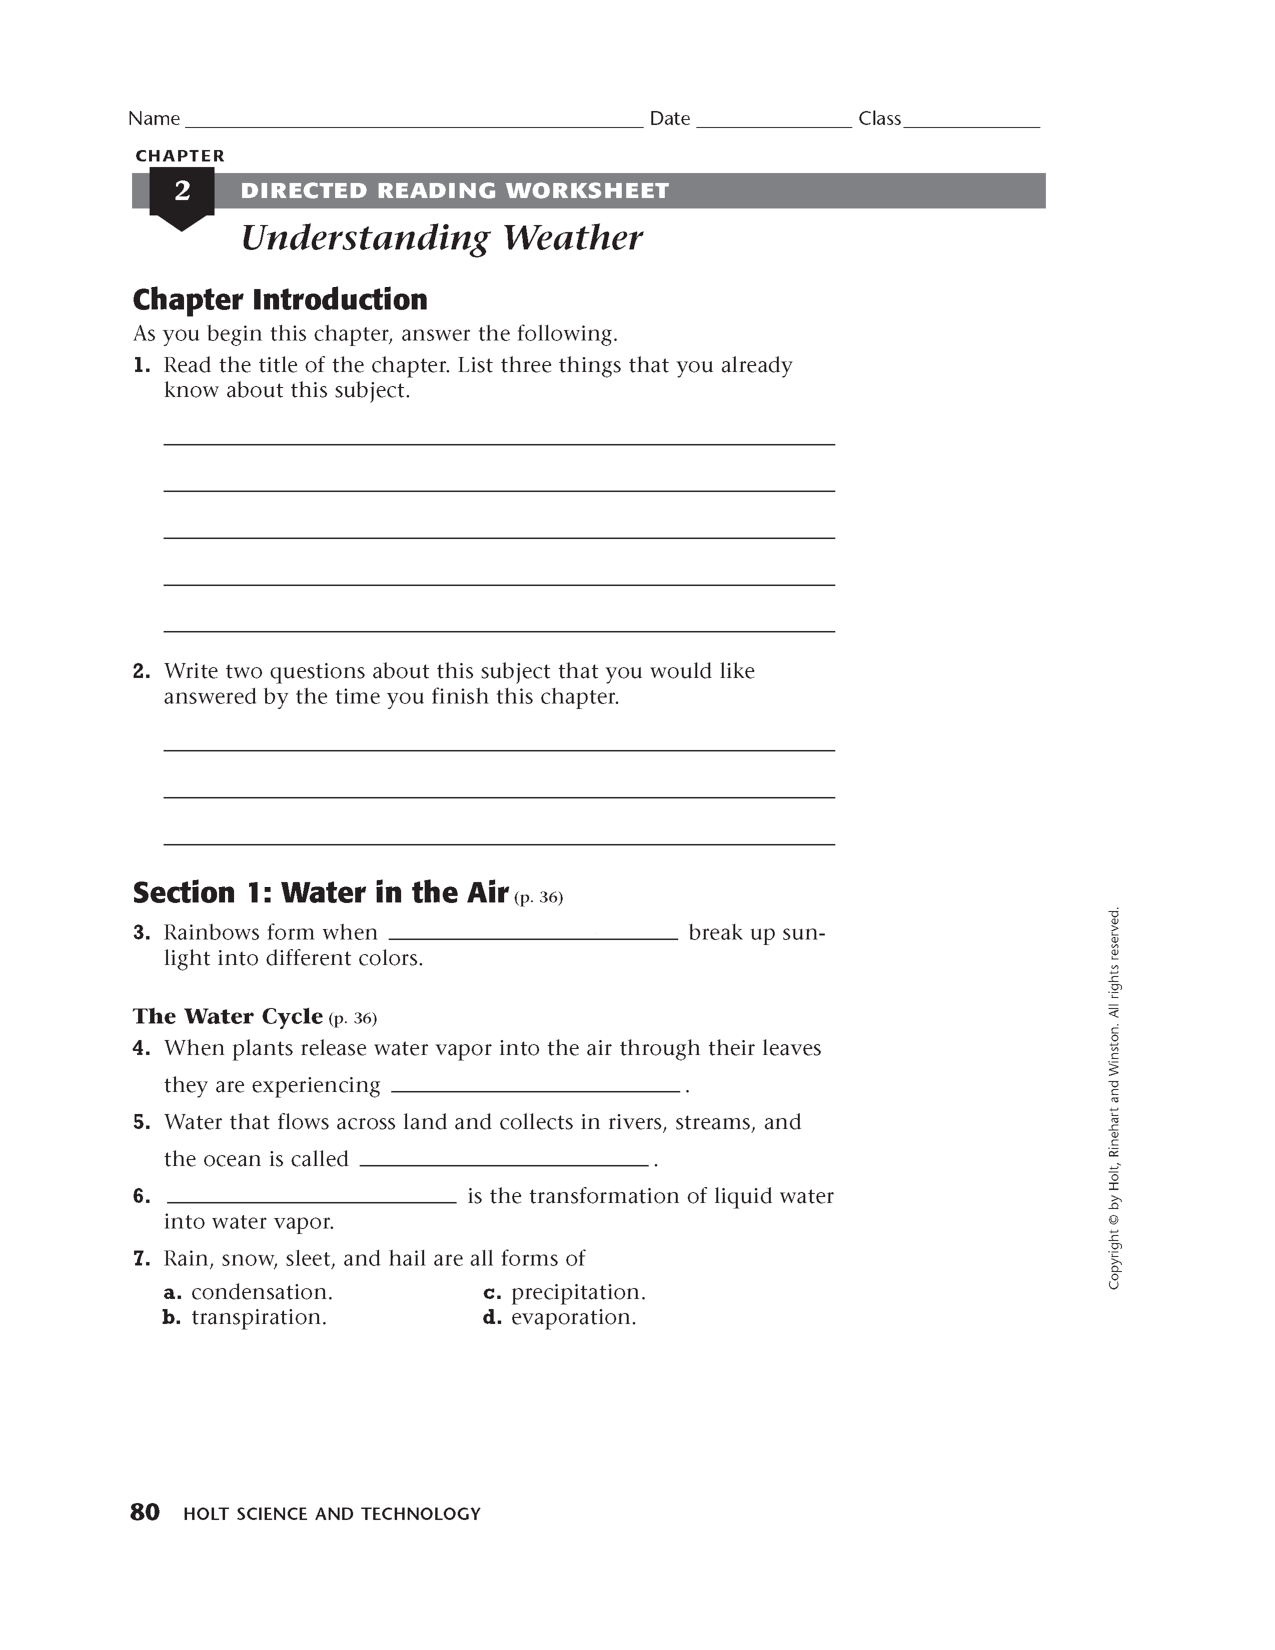 Holt Science and Technology Worksheet Answers Image